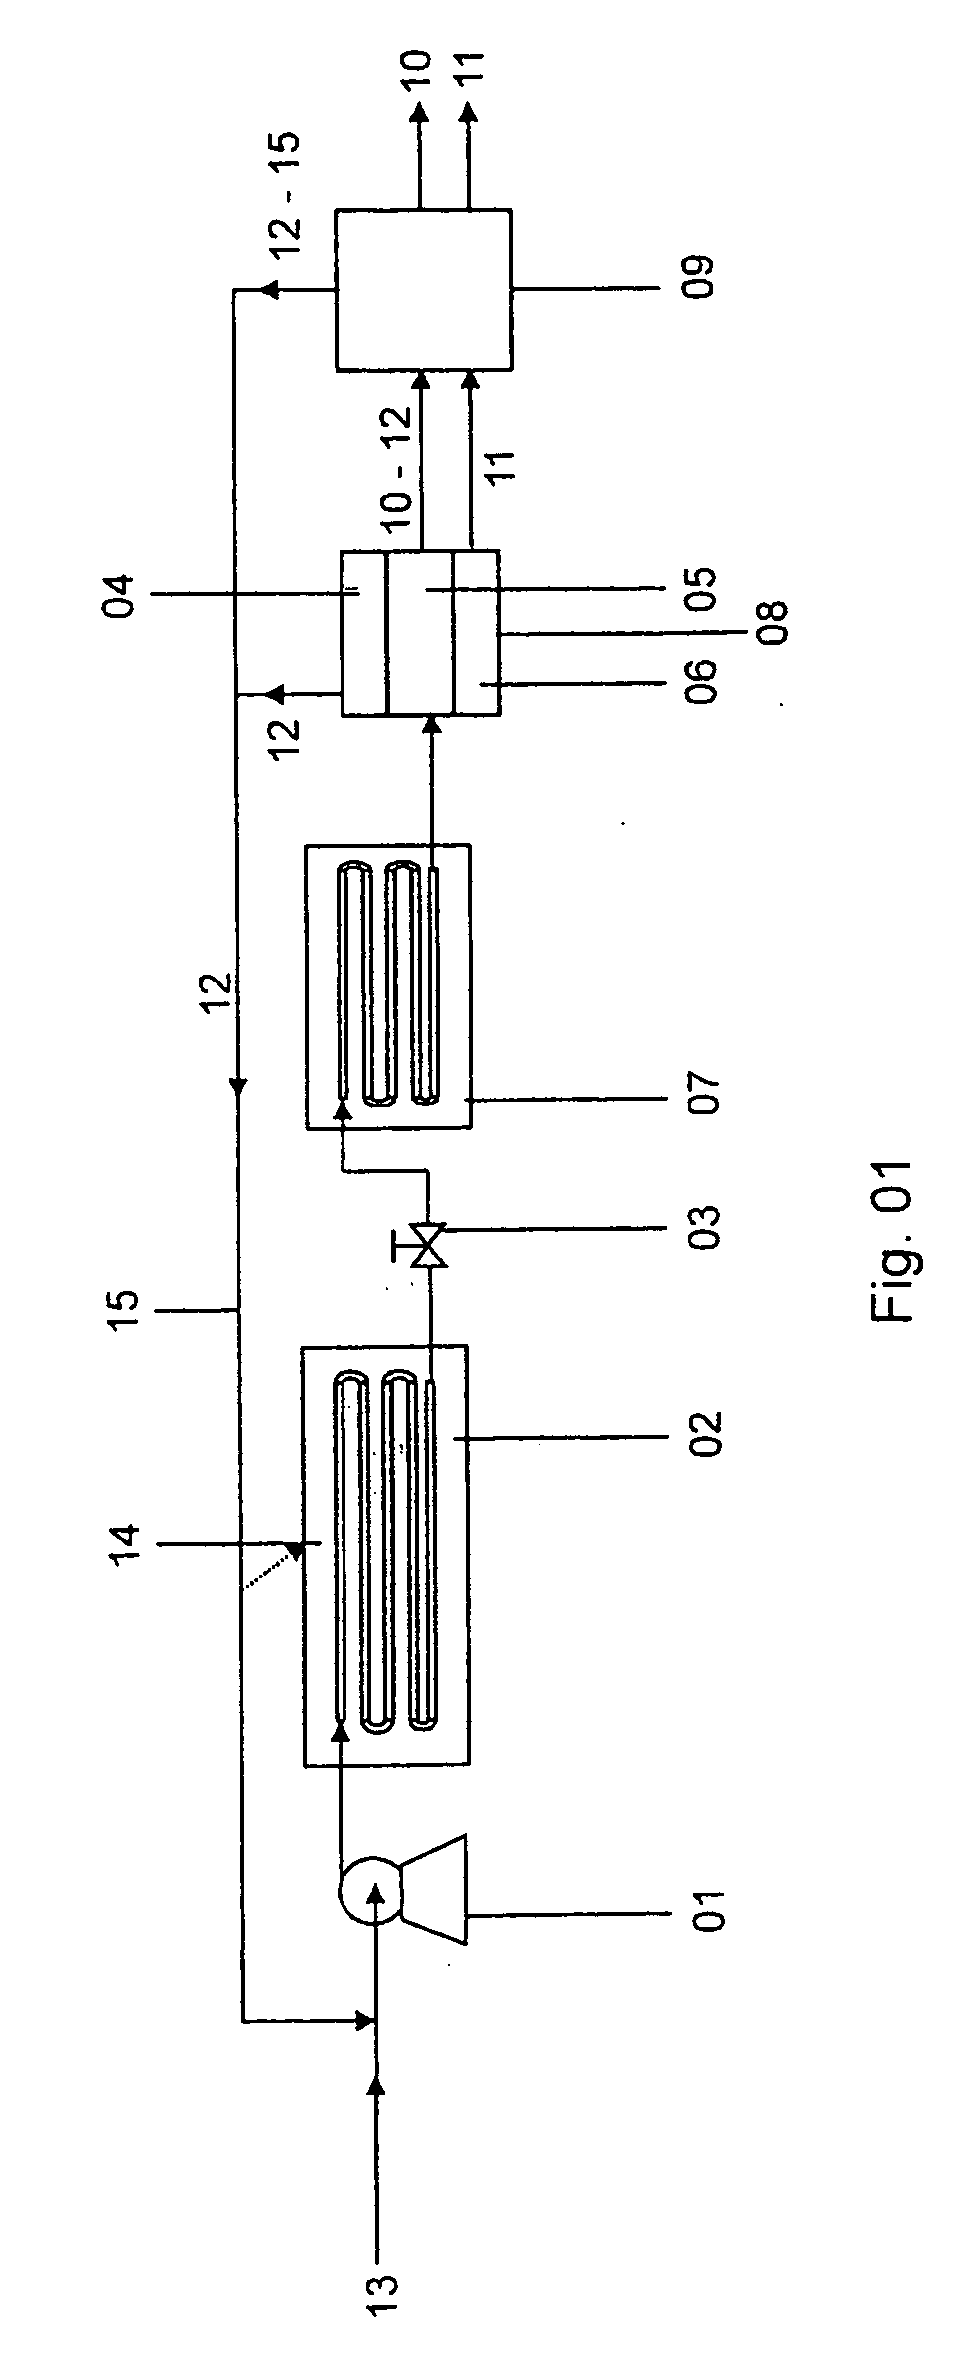 Process for the production of biodiesel in continuous mode without catalysts